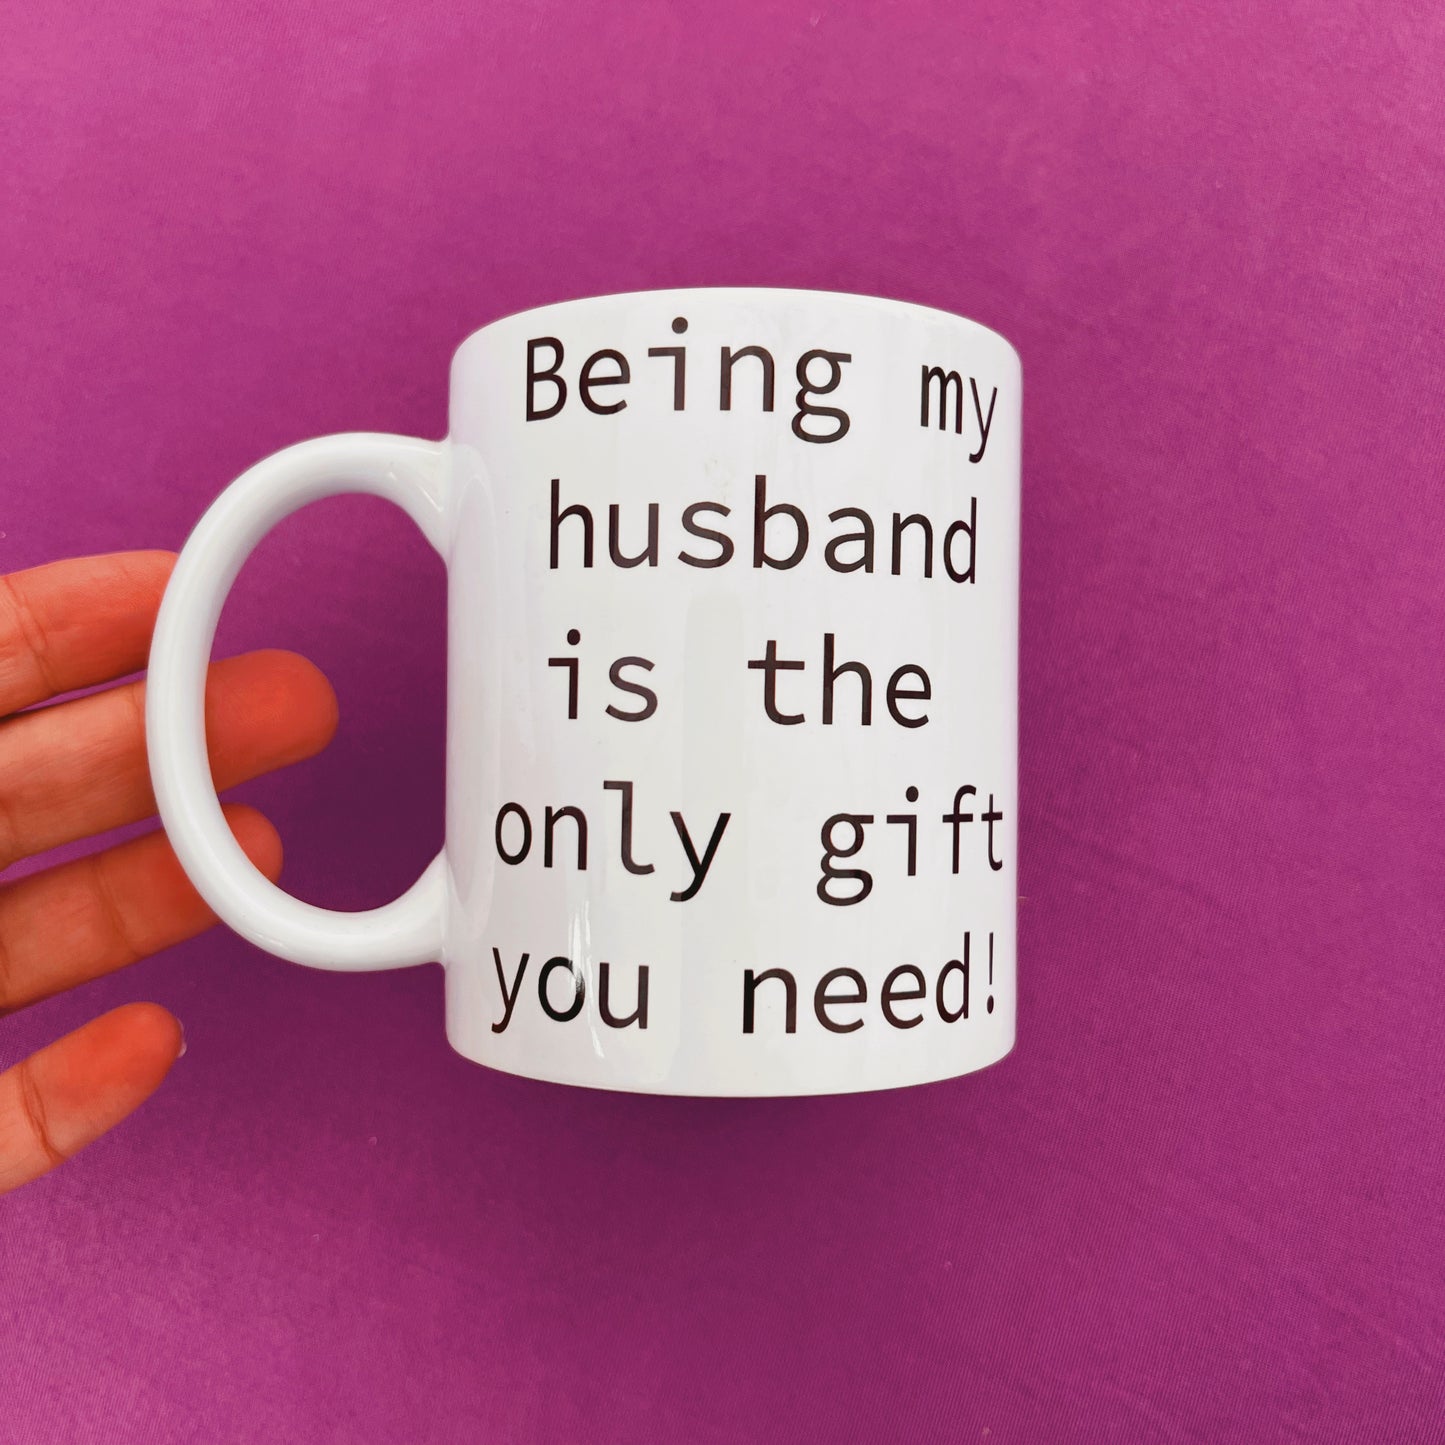 Being my husband is the only gift you need